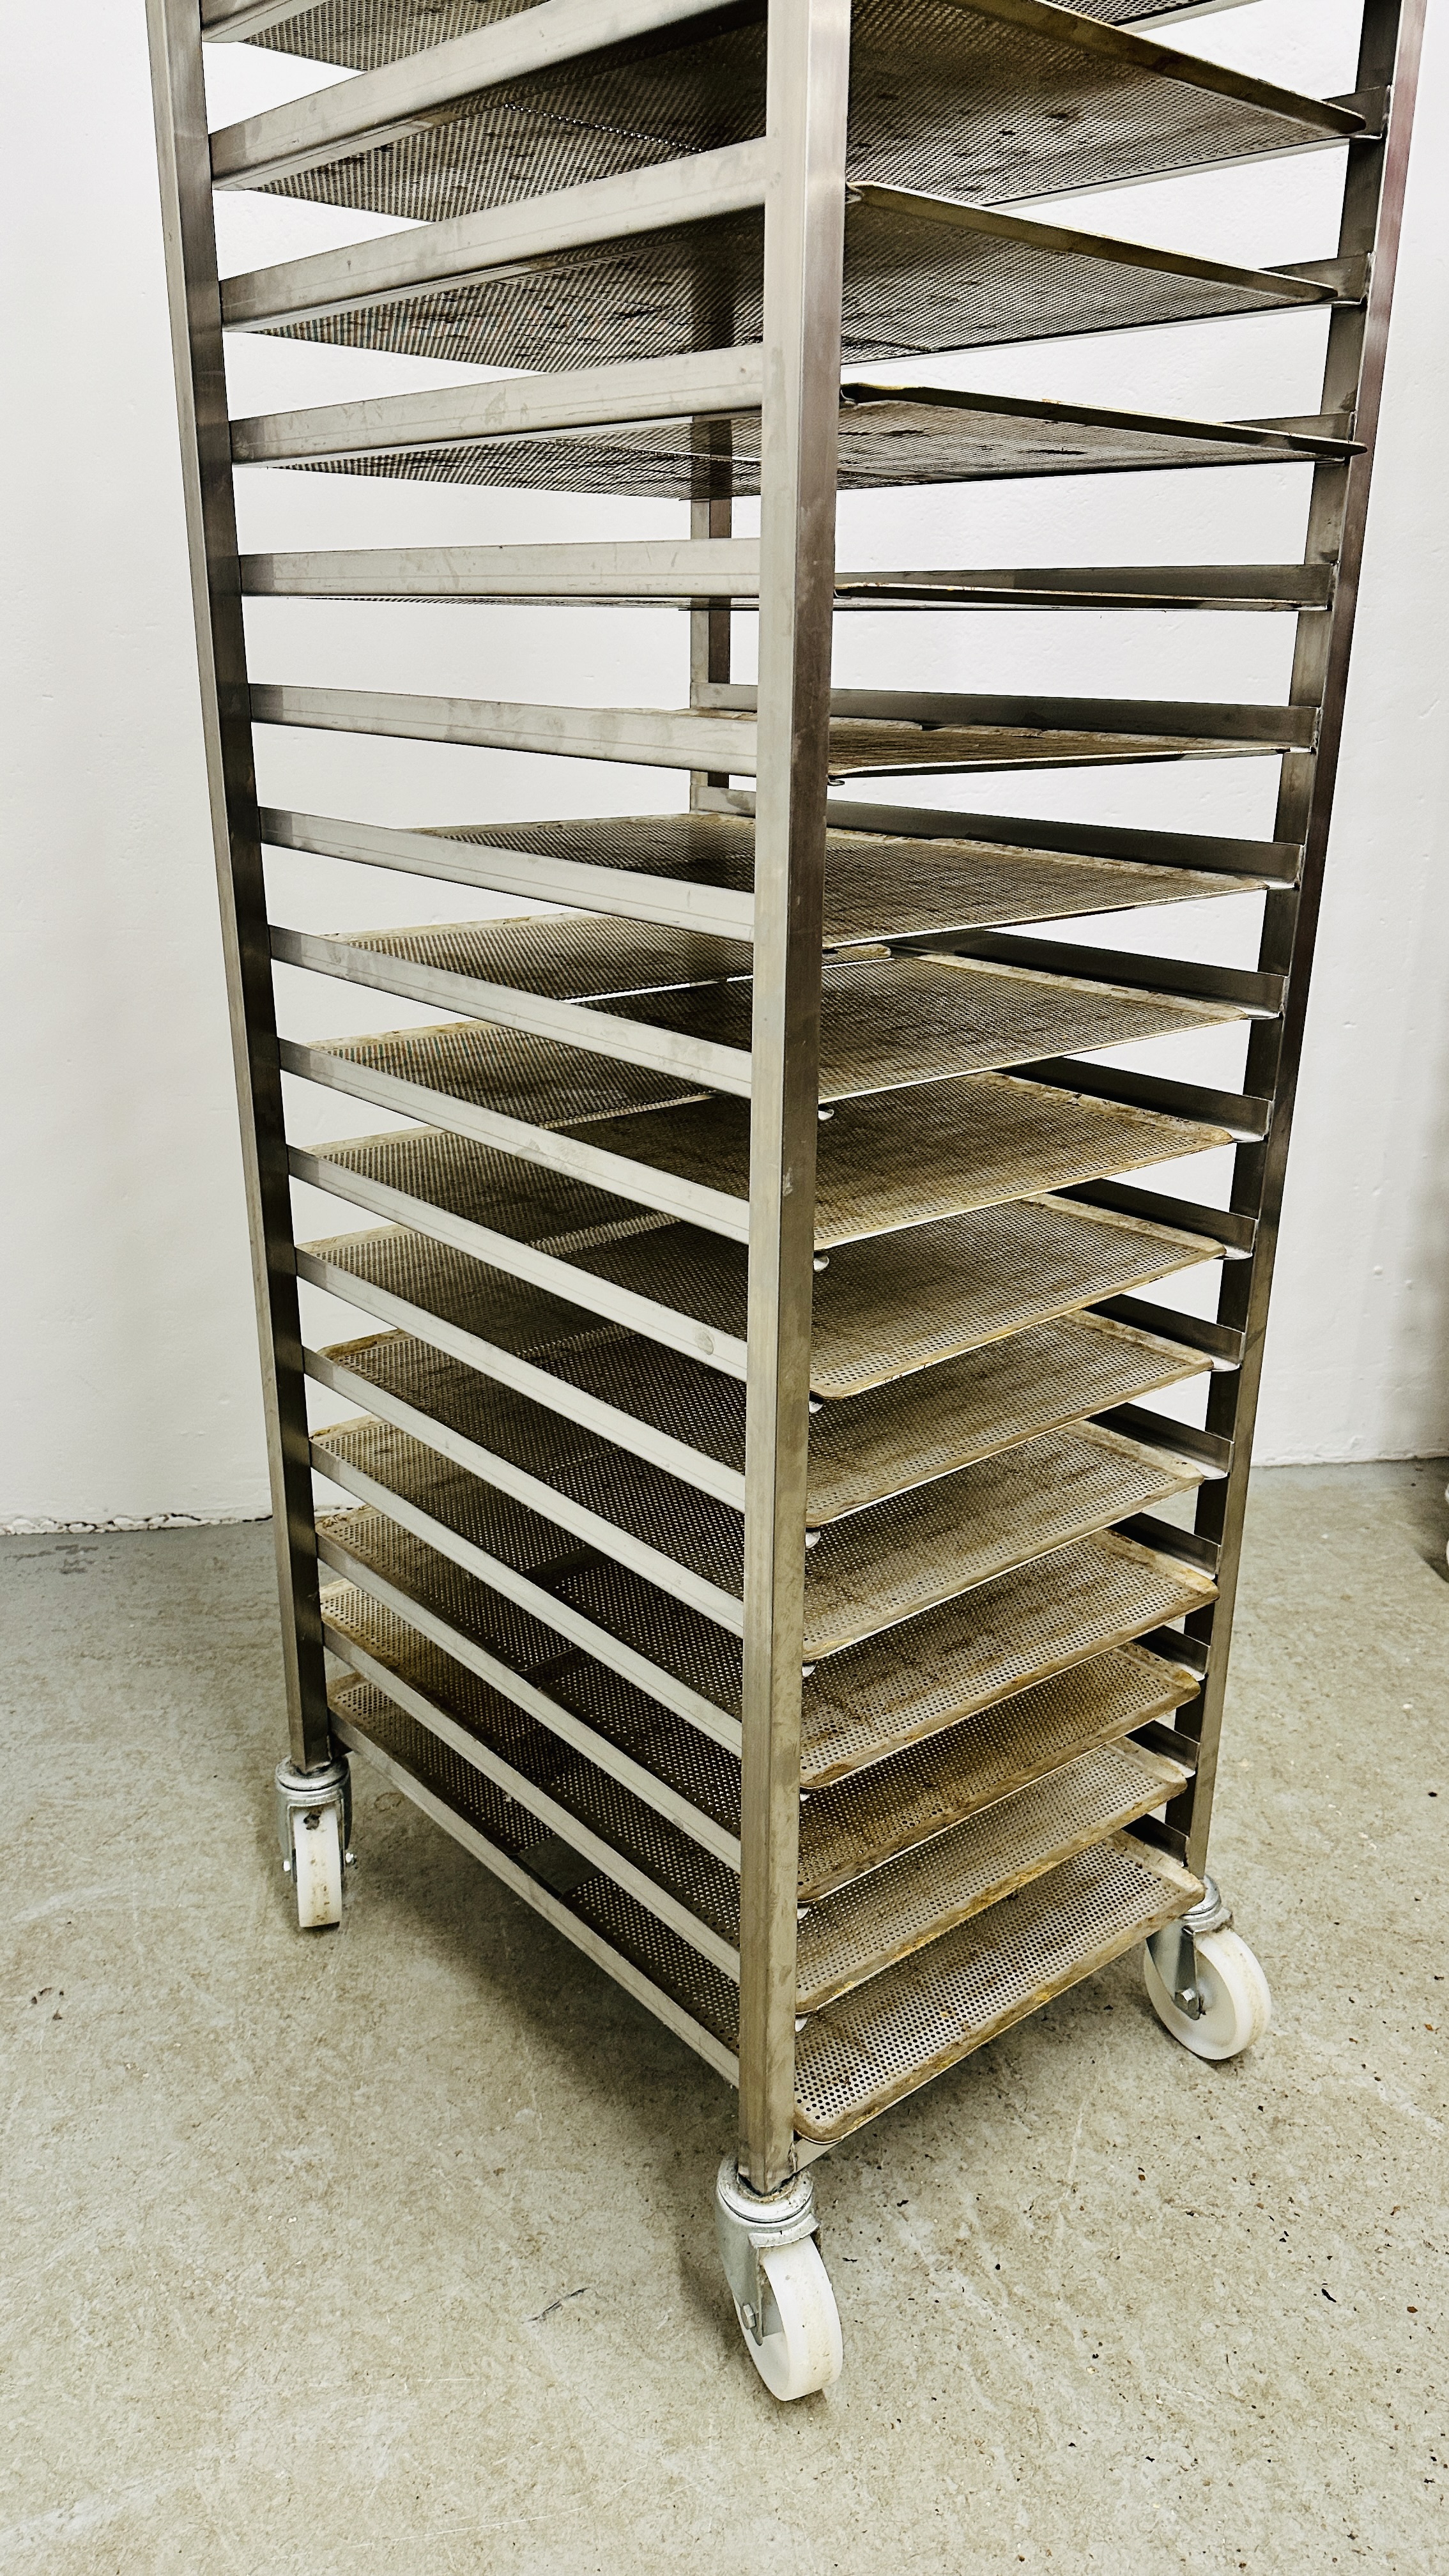 STAINLESS STEEL 20 TIER COMMERCIAL WHEELED BAKING TRAY RACK COMPLETE WITH TRAYS - HEIGHT 182CM. - Image 6 of 7